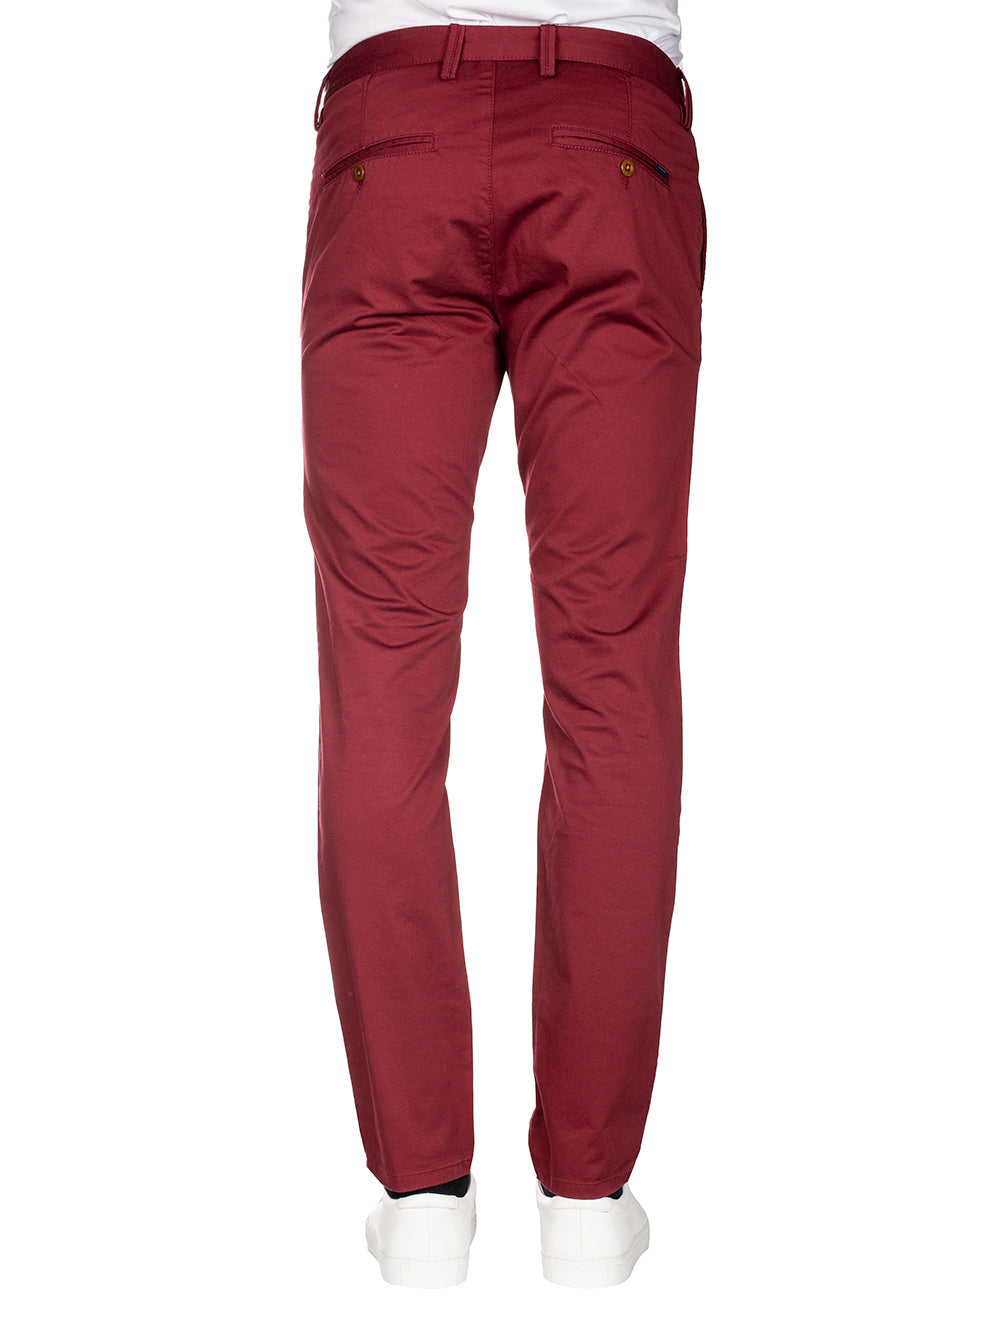 Hallden Twill Chinos-Cabernet Red